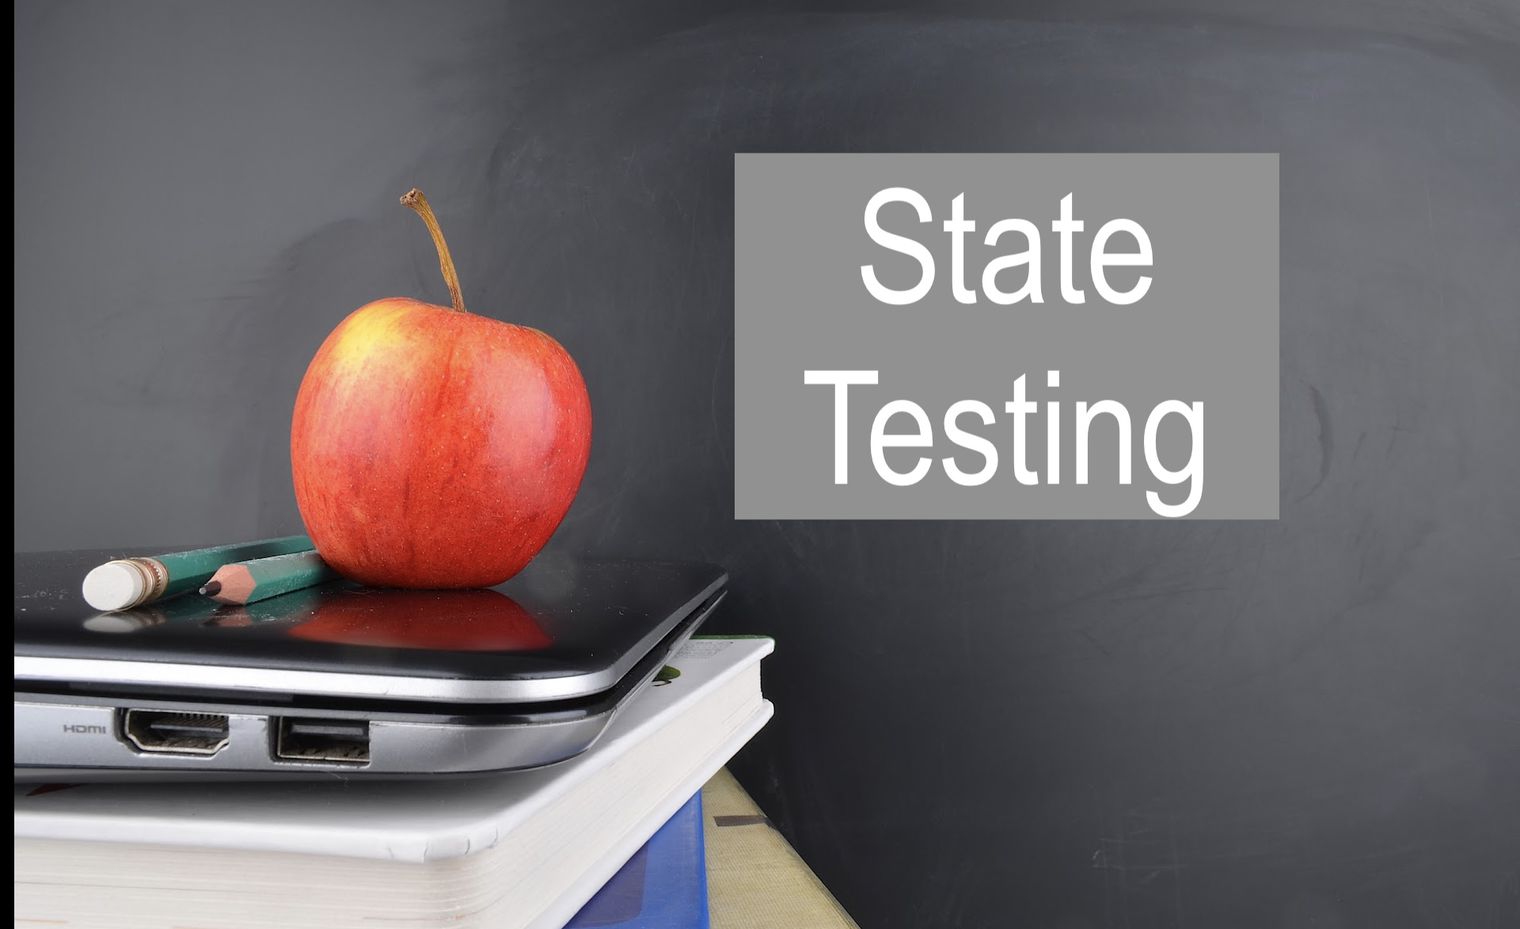 State Testing red apple on a laptop computer